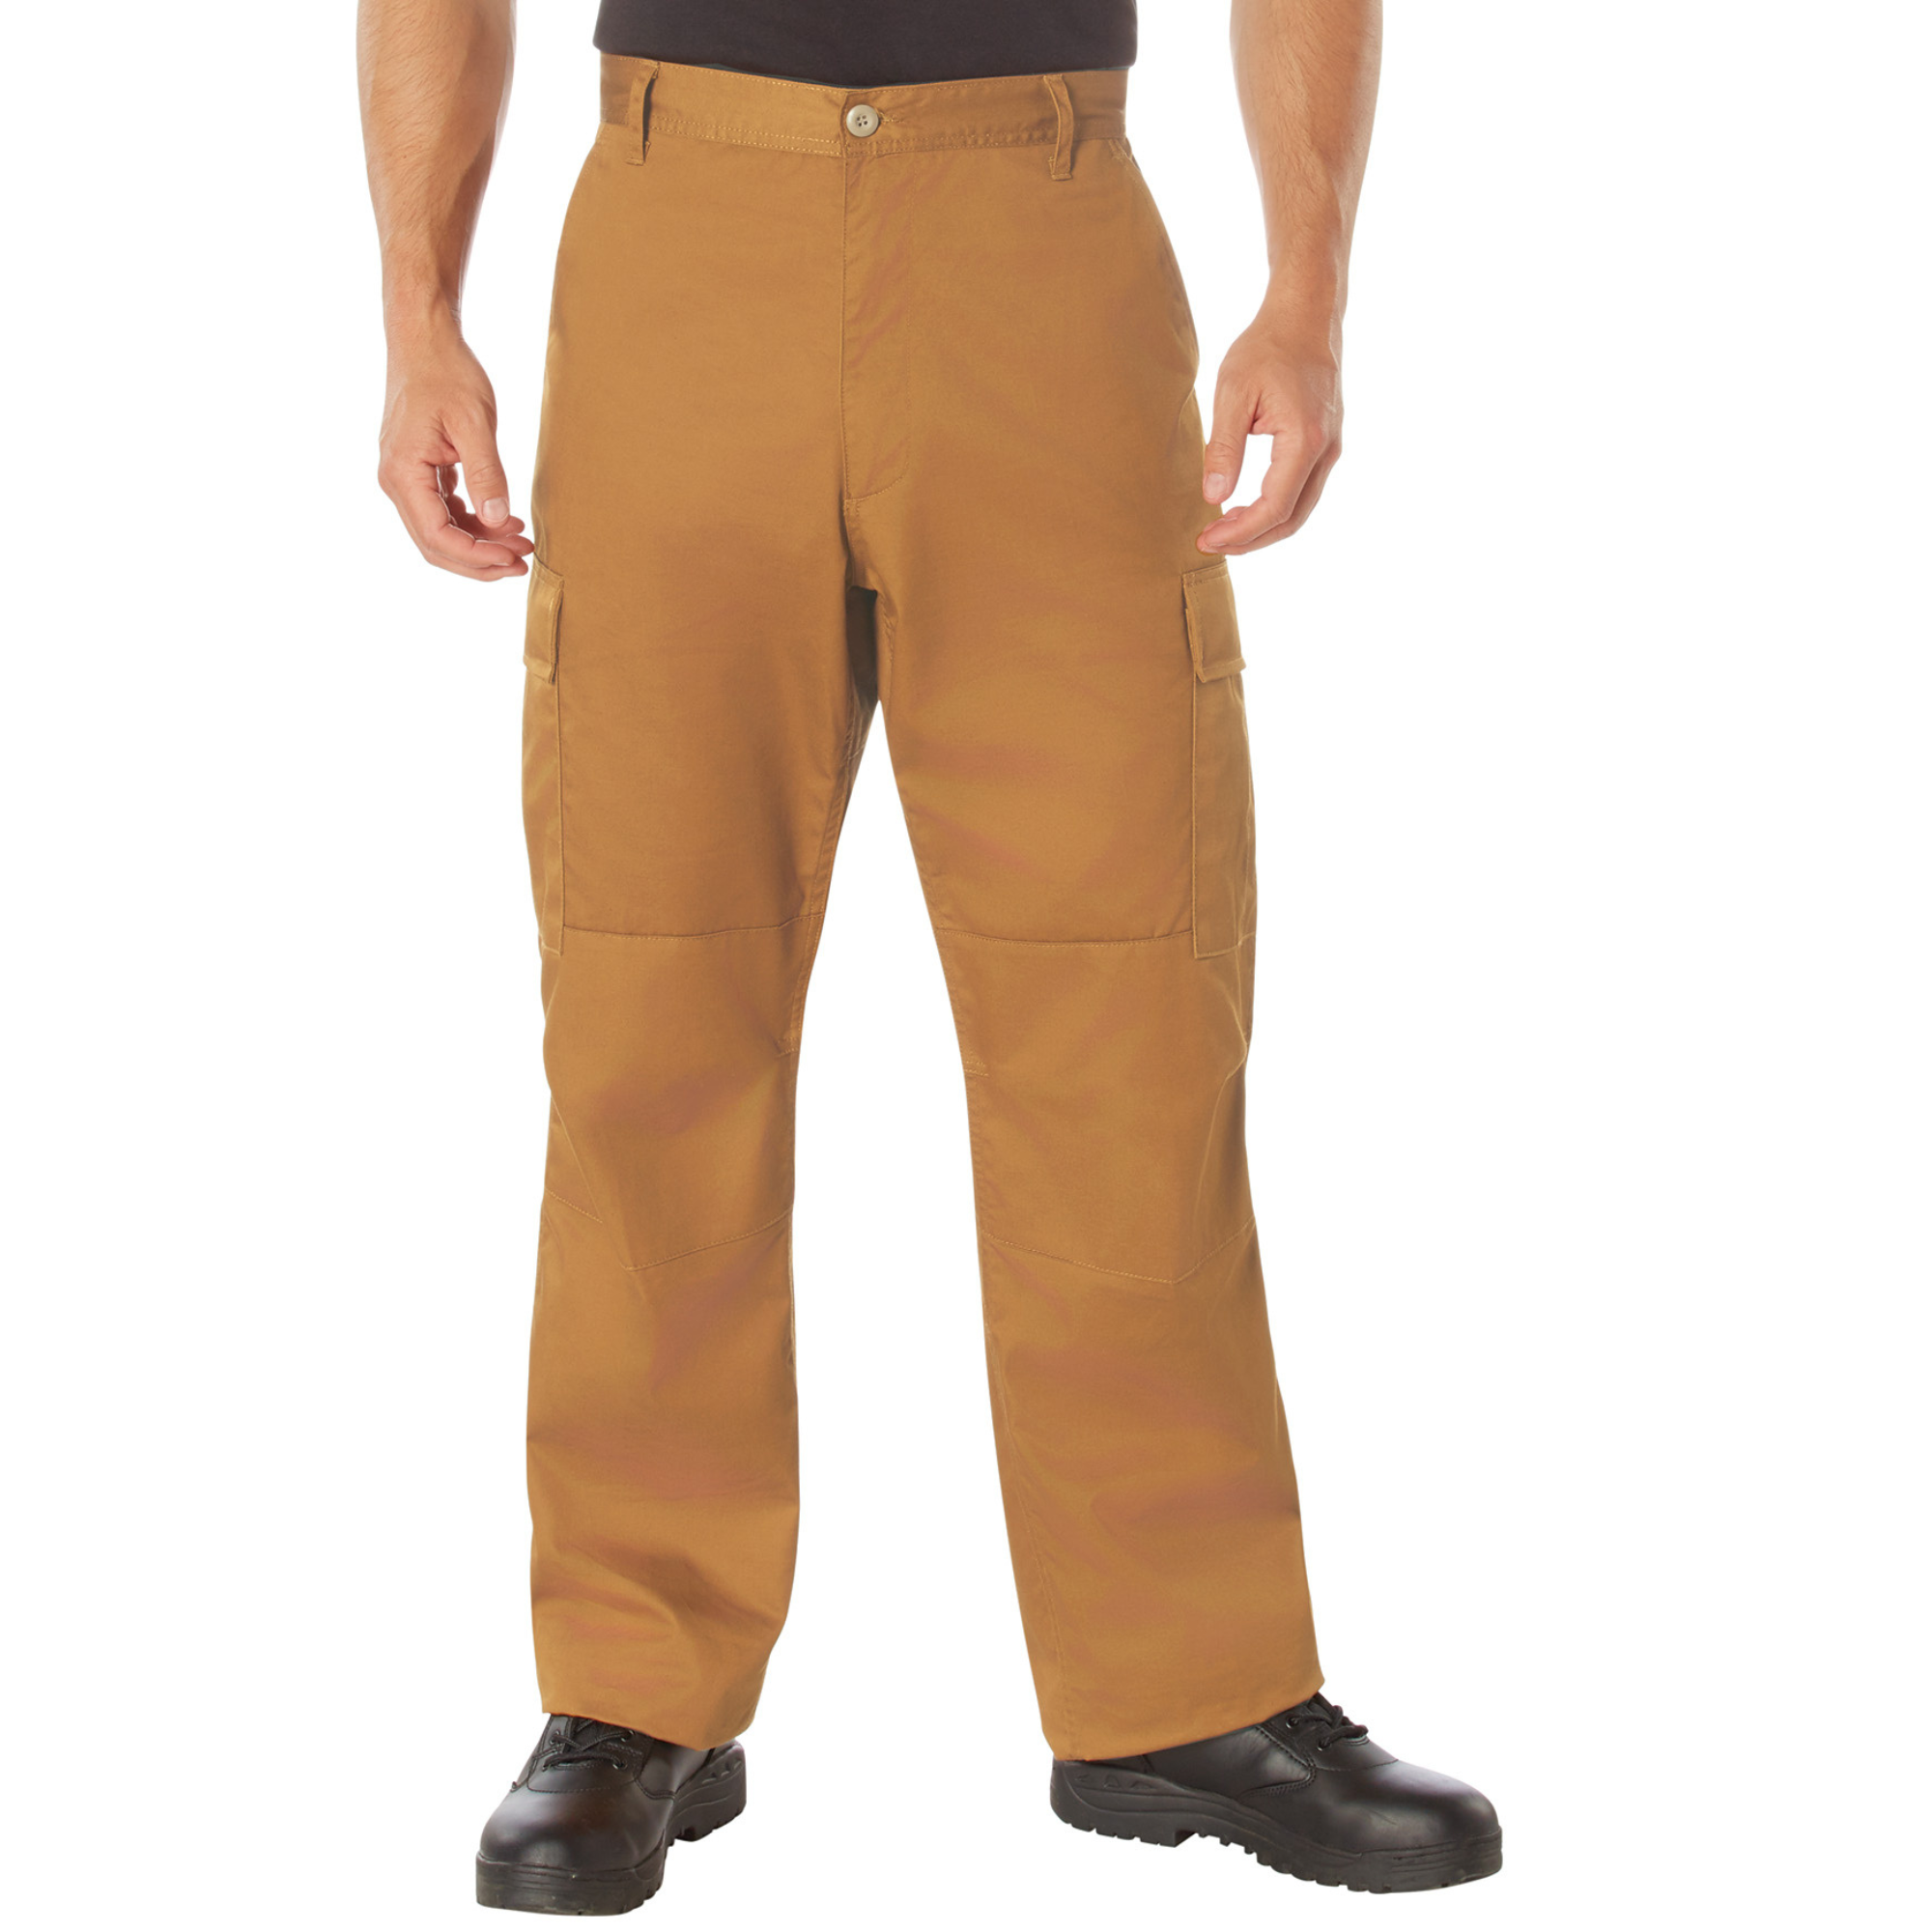 Work Brown Military BDU Pants with Zipper Fly - Cotton Polyester Twill